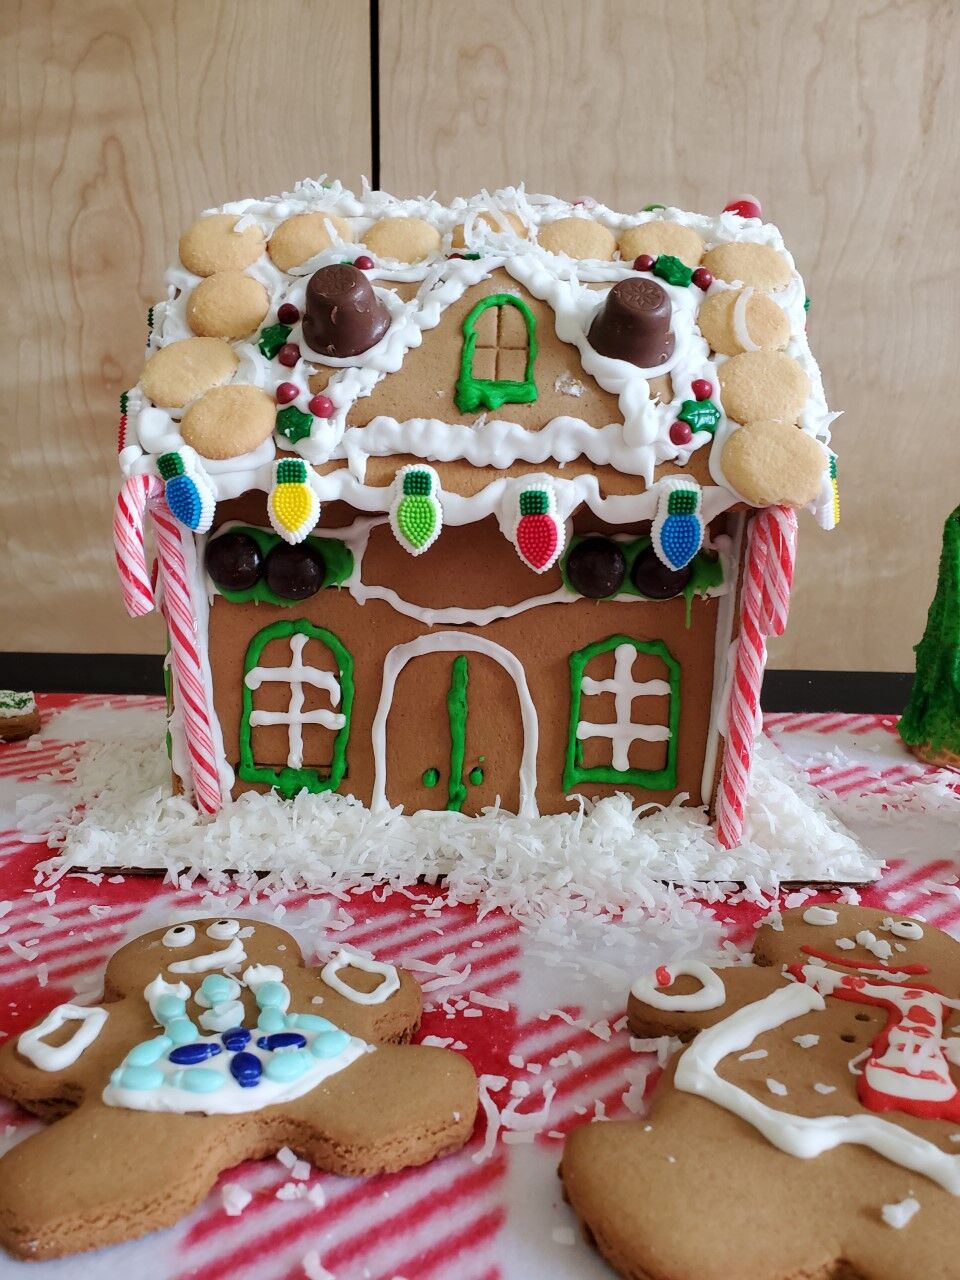 Gingerbread House Contest